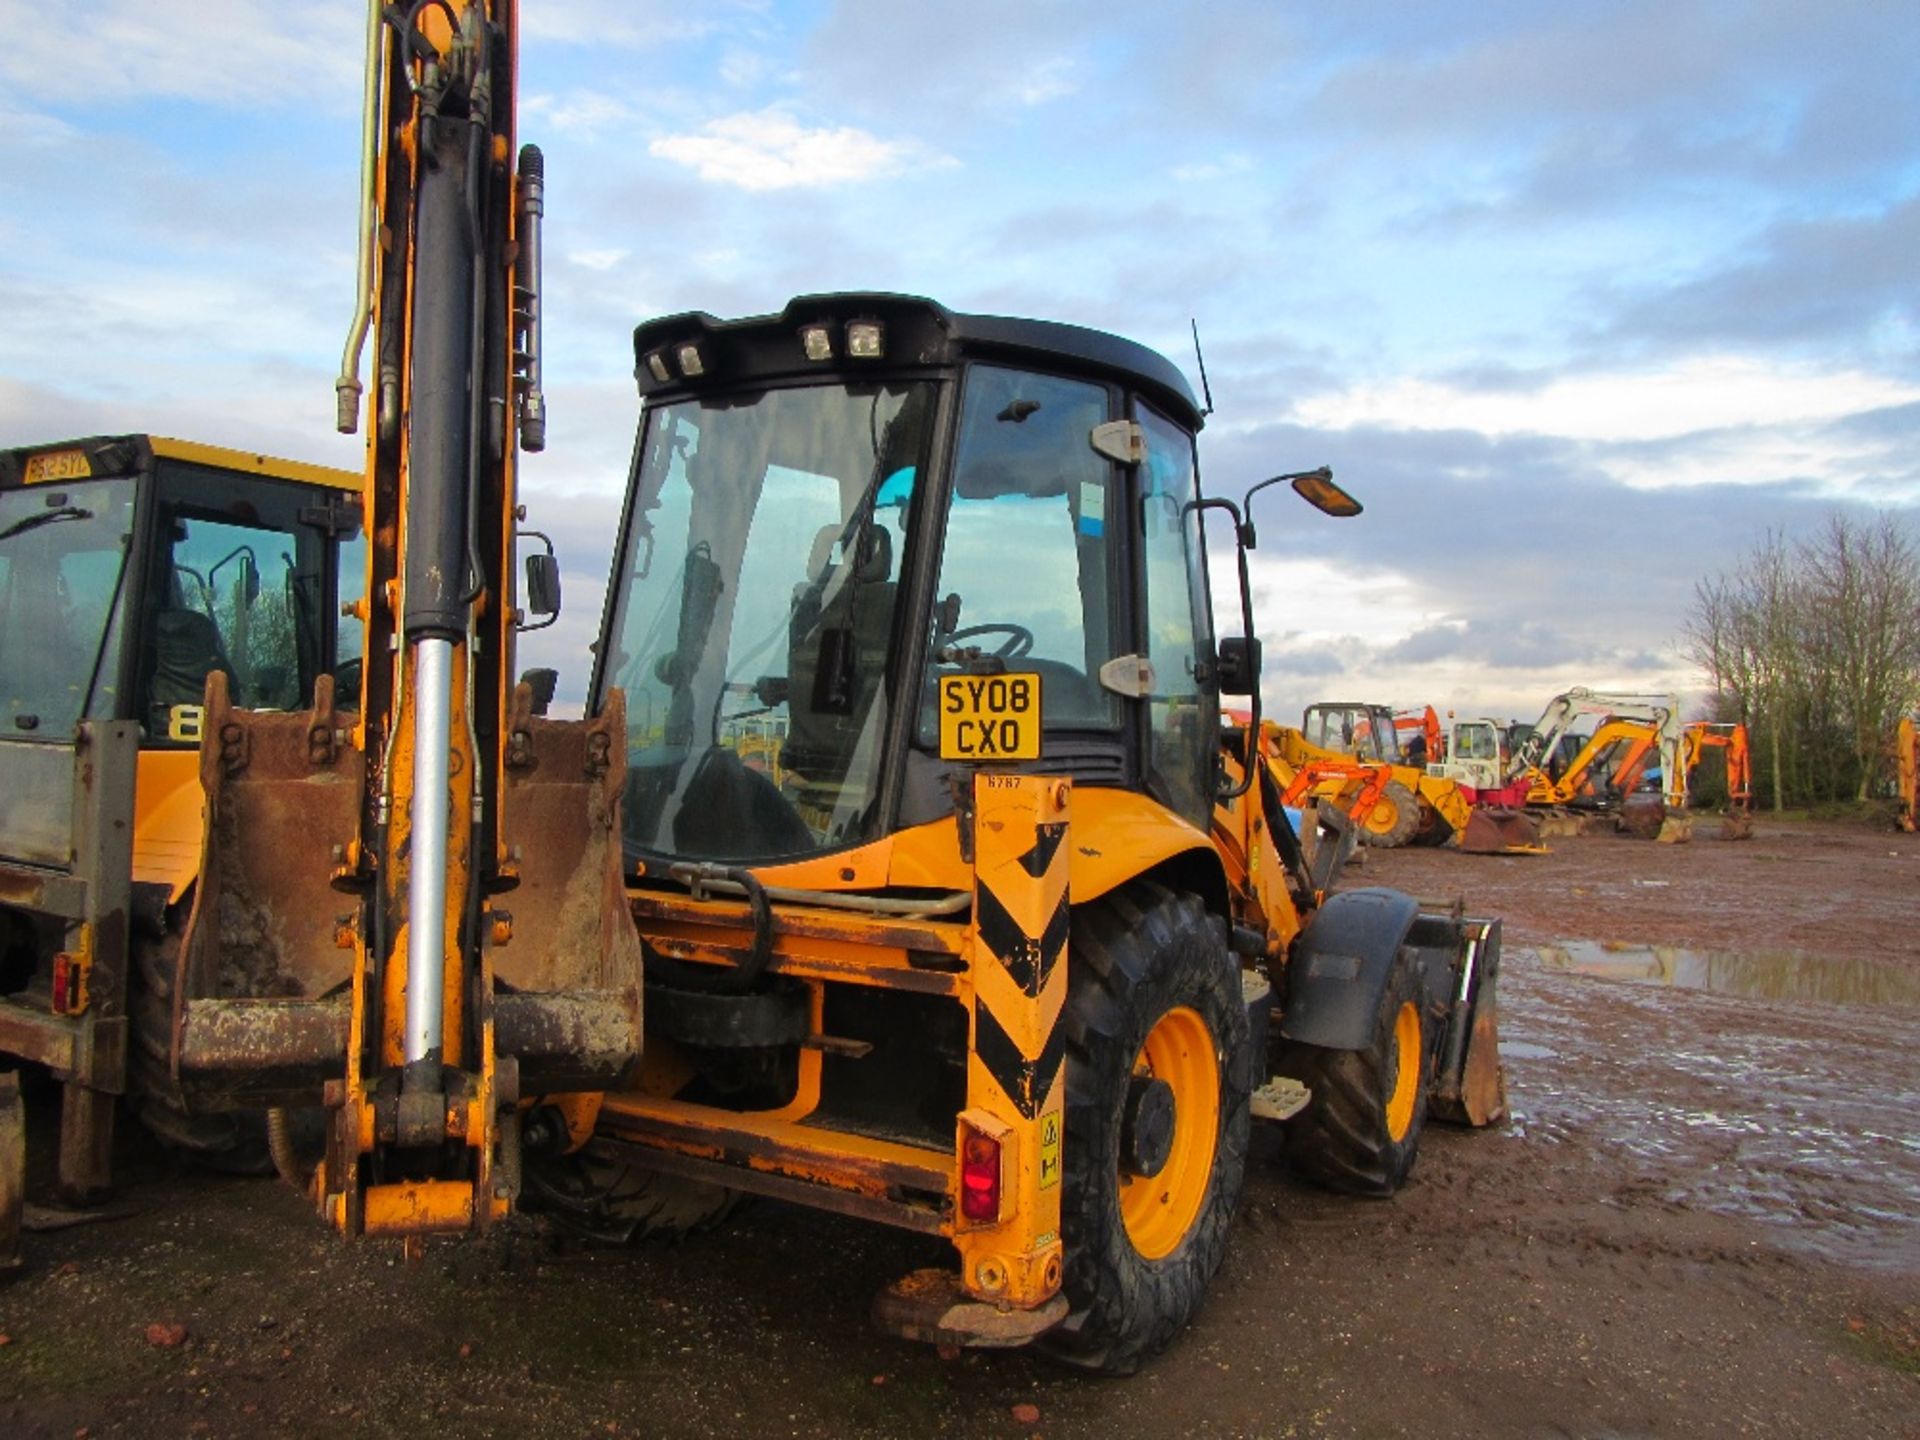 2008 JCB 3CX Contractor c/w Turbo, SRS, Hydraulic Quick Hitch, 4 in 1 Bucket, Forks, Torque Lock - Image 5 of 6